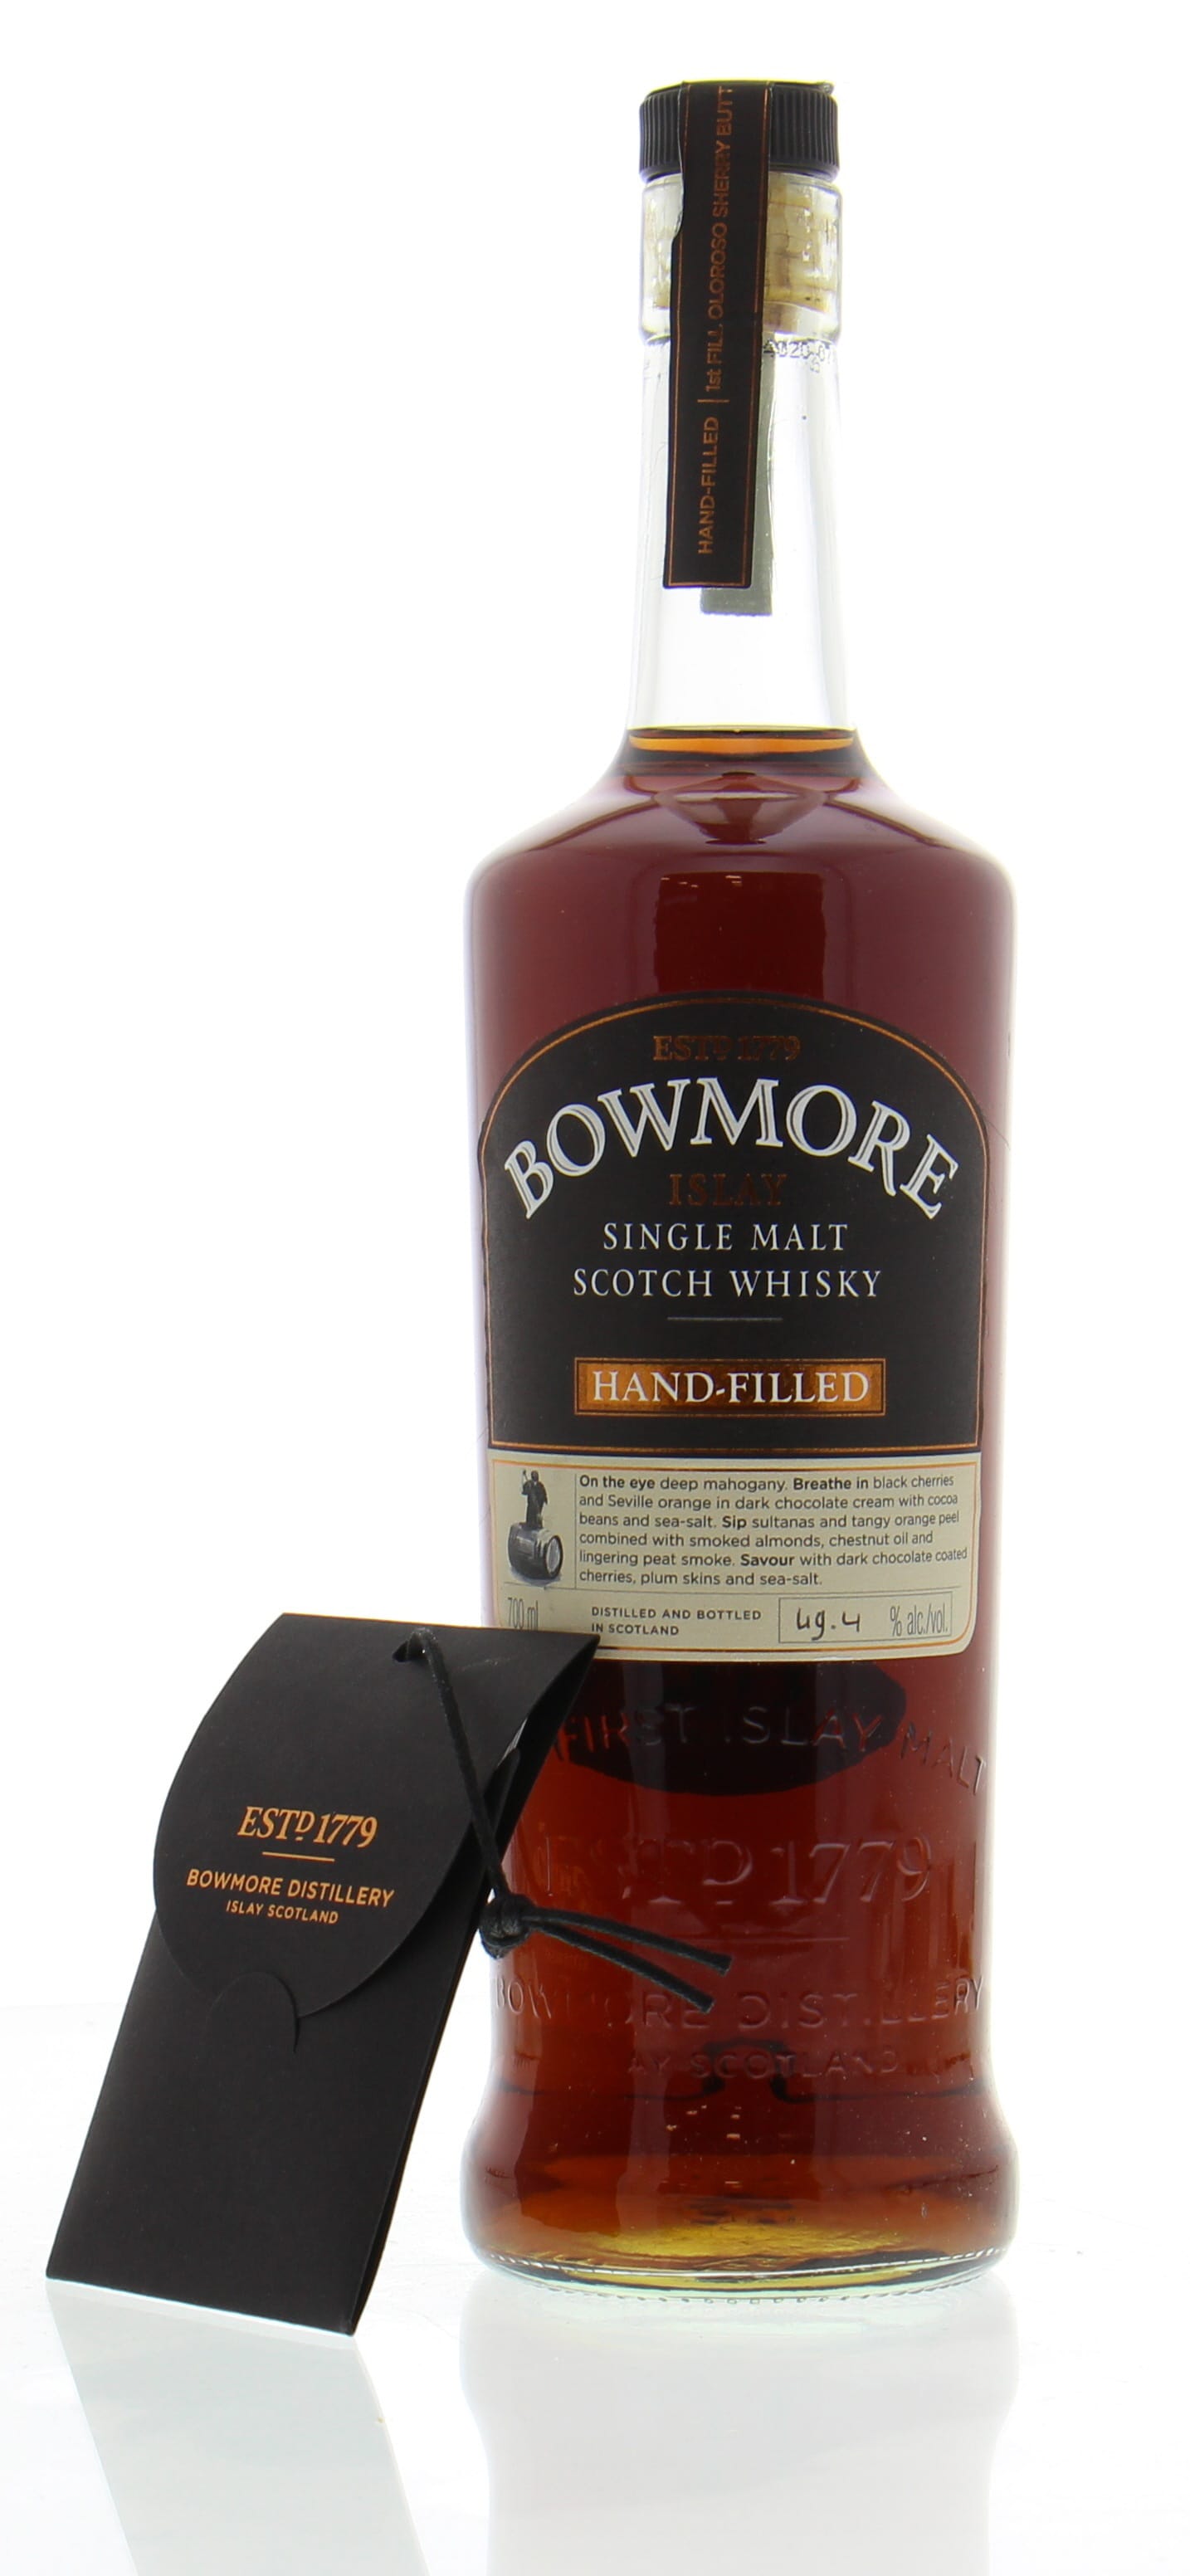 Bowmore - 18 Years Old Hand-filled at the distillery Cask:1572 49.4% 1995 Perfect